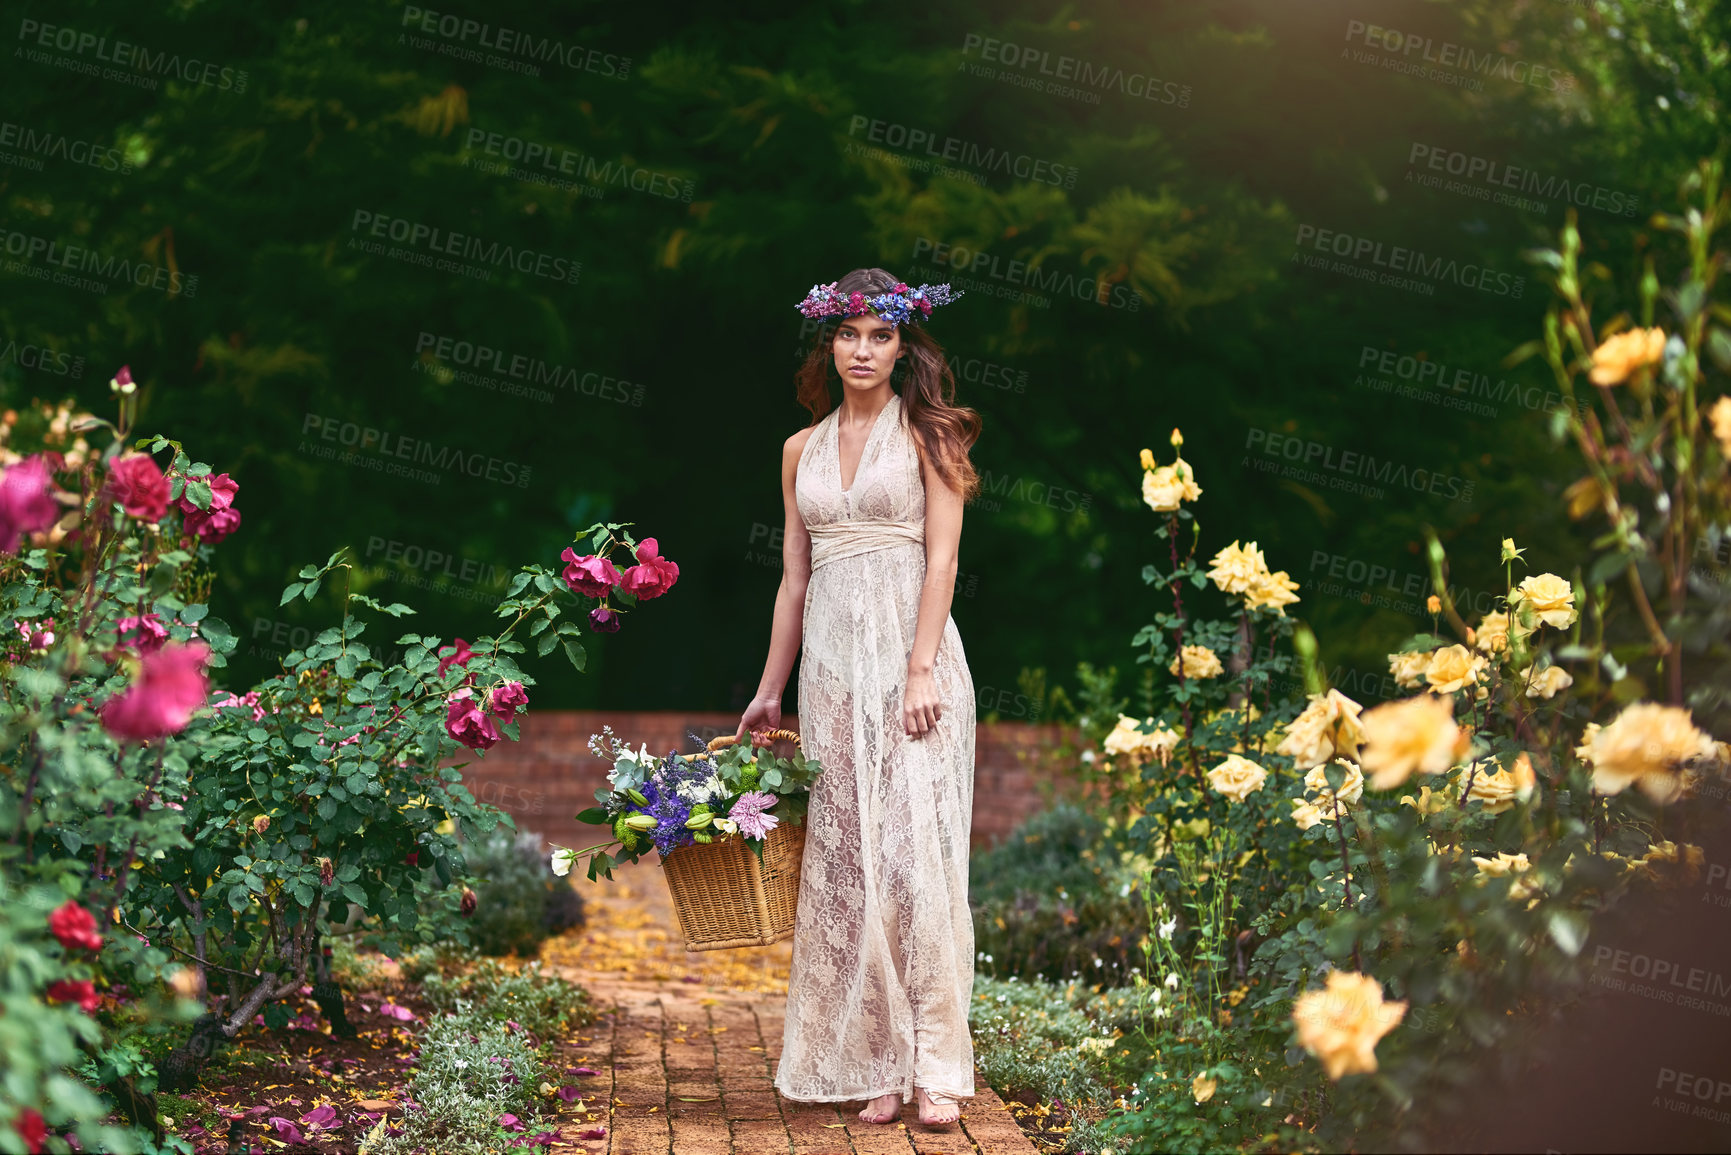 Buy stock photo Shot of a beautiful young woman wearing a floral head wreath and holding a basket full of flowers in nature